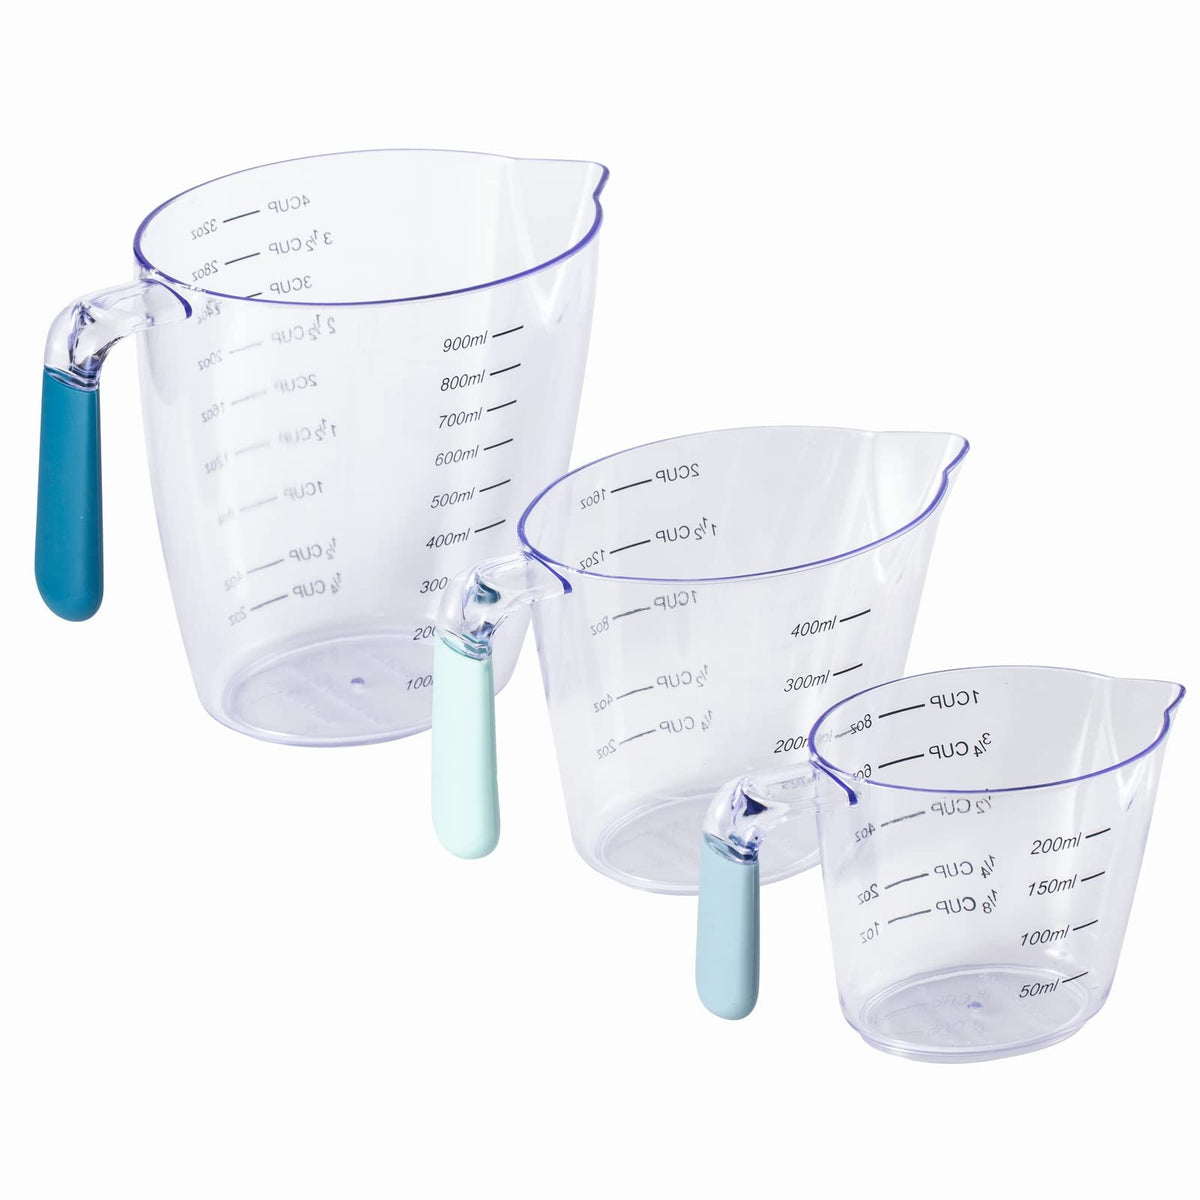 Vremi 3 Piece Plastic Measuring Cups Set - BPA Free Liquid Nesting Stackable Measuring Cups with Spout and Decorative Red Blue